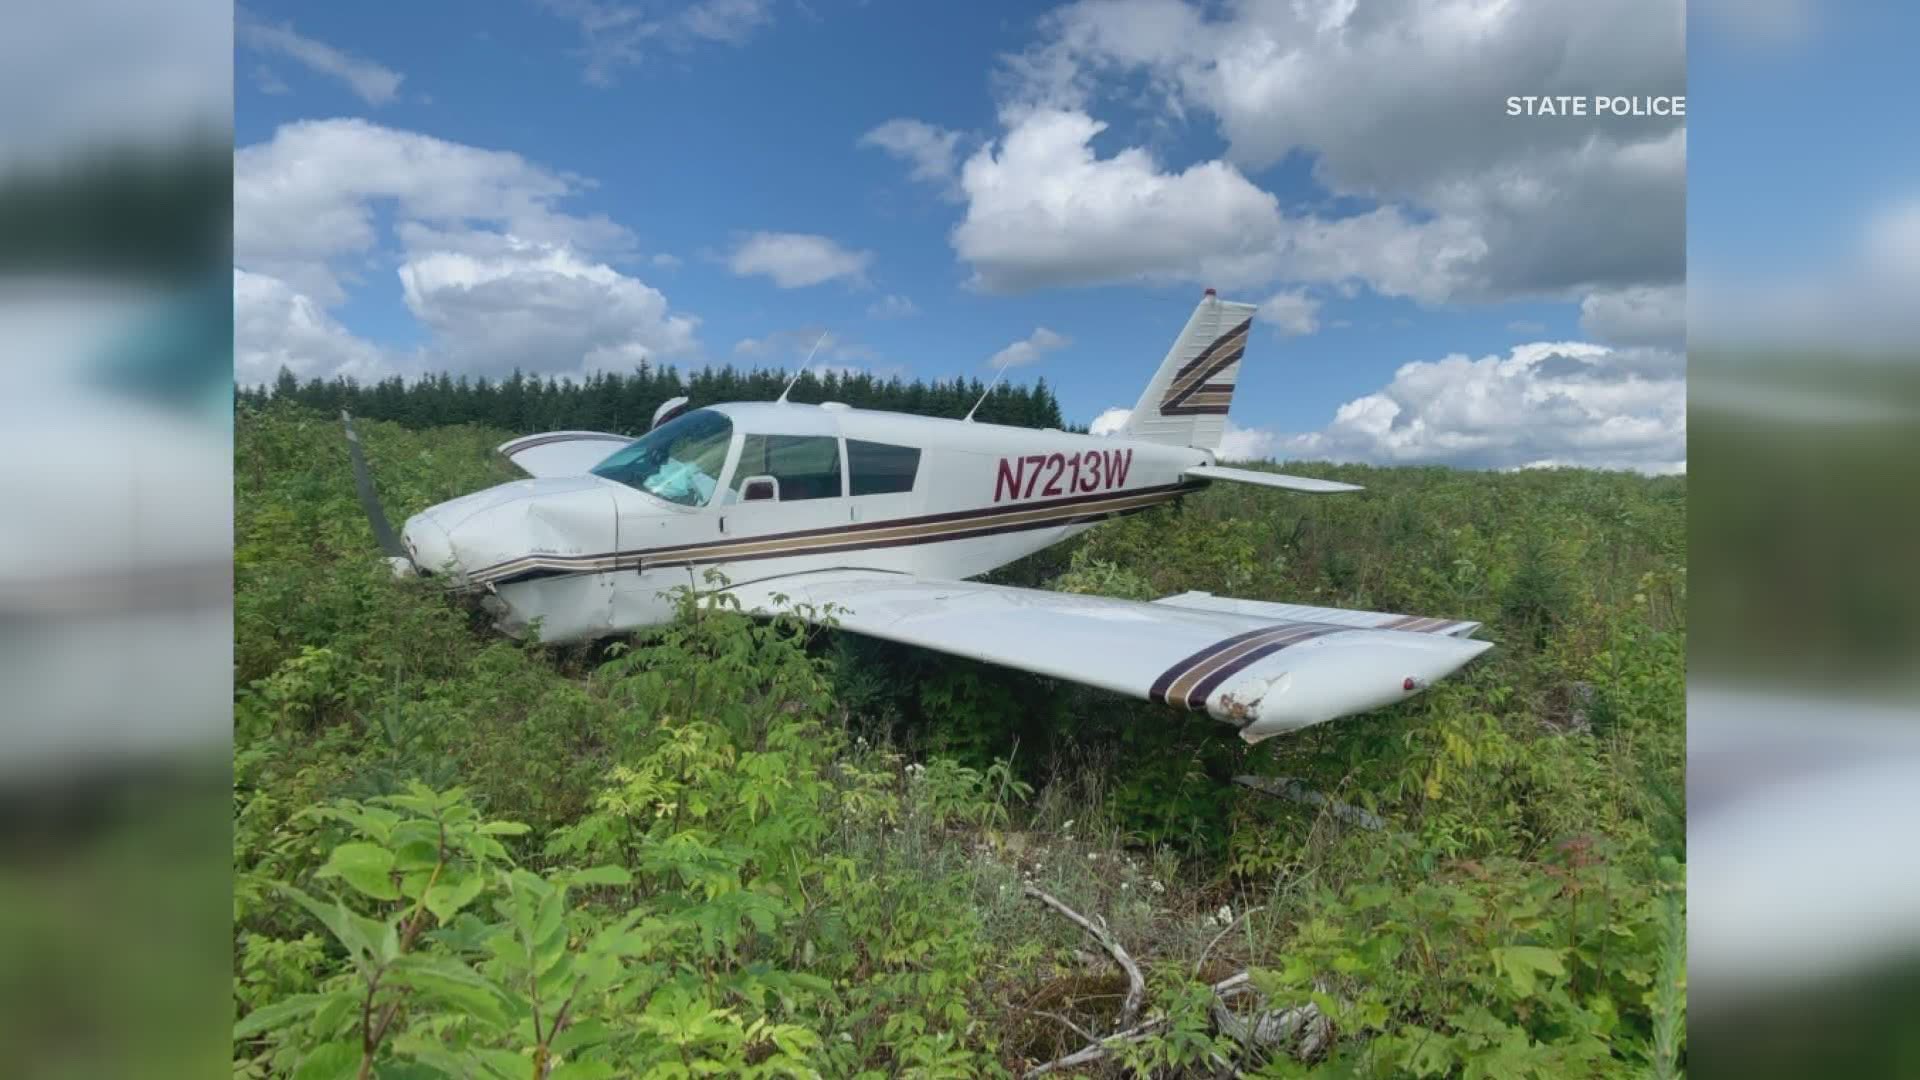 Two men made an emergency landing in Aroostook County when the engine in their small plane failed.